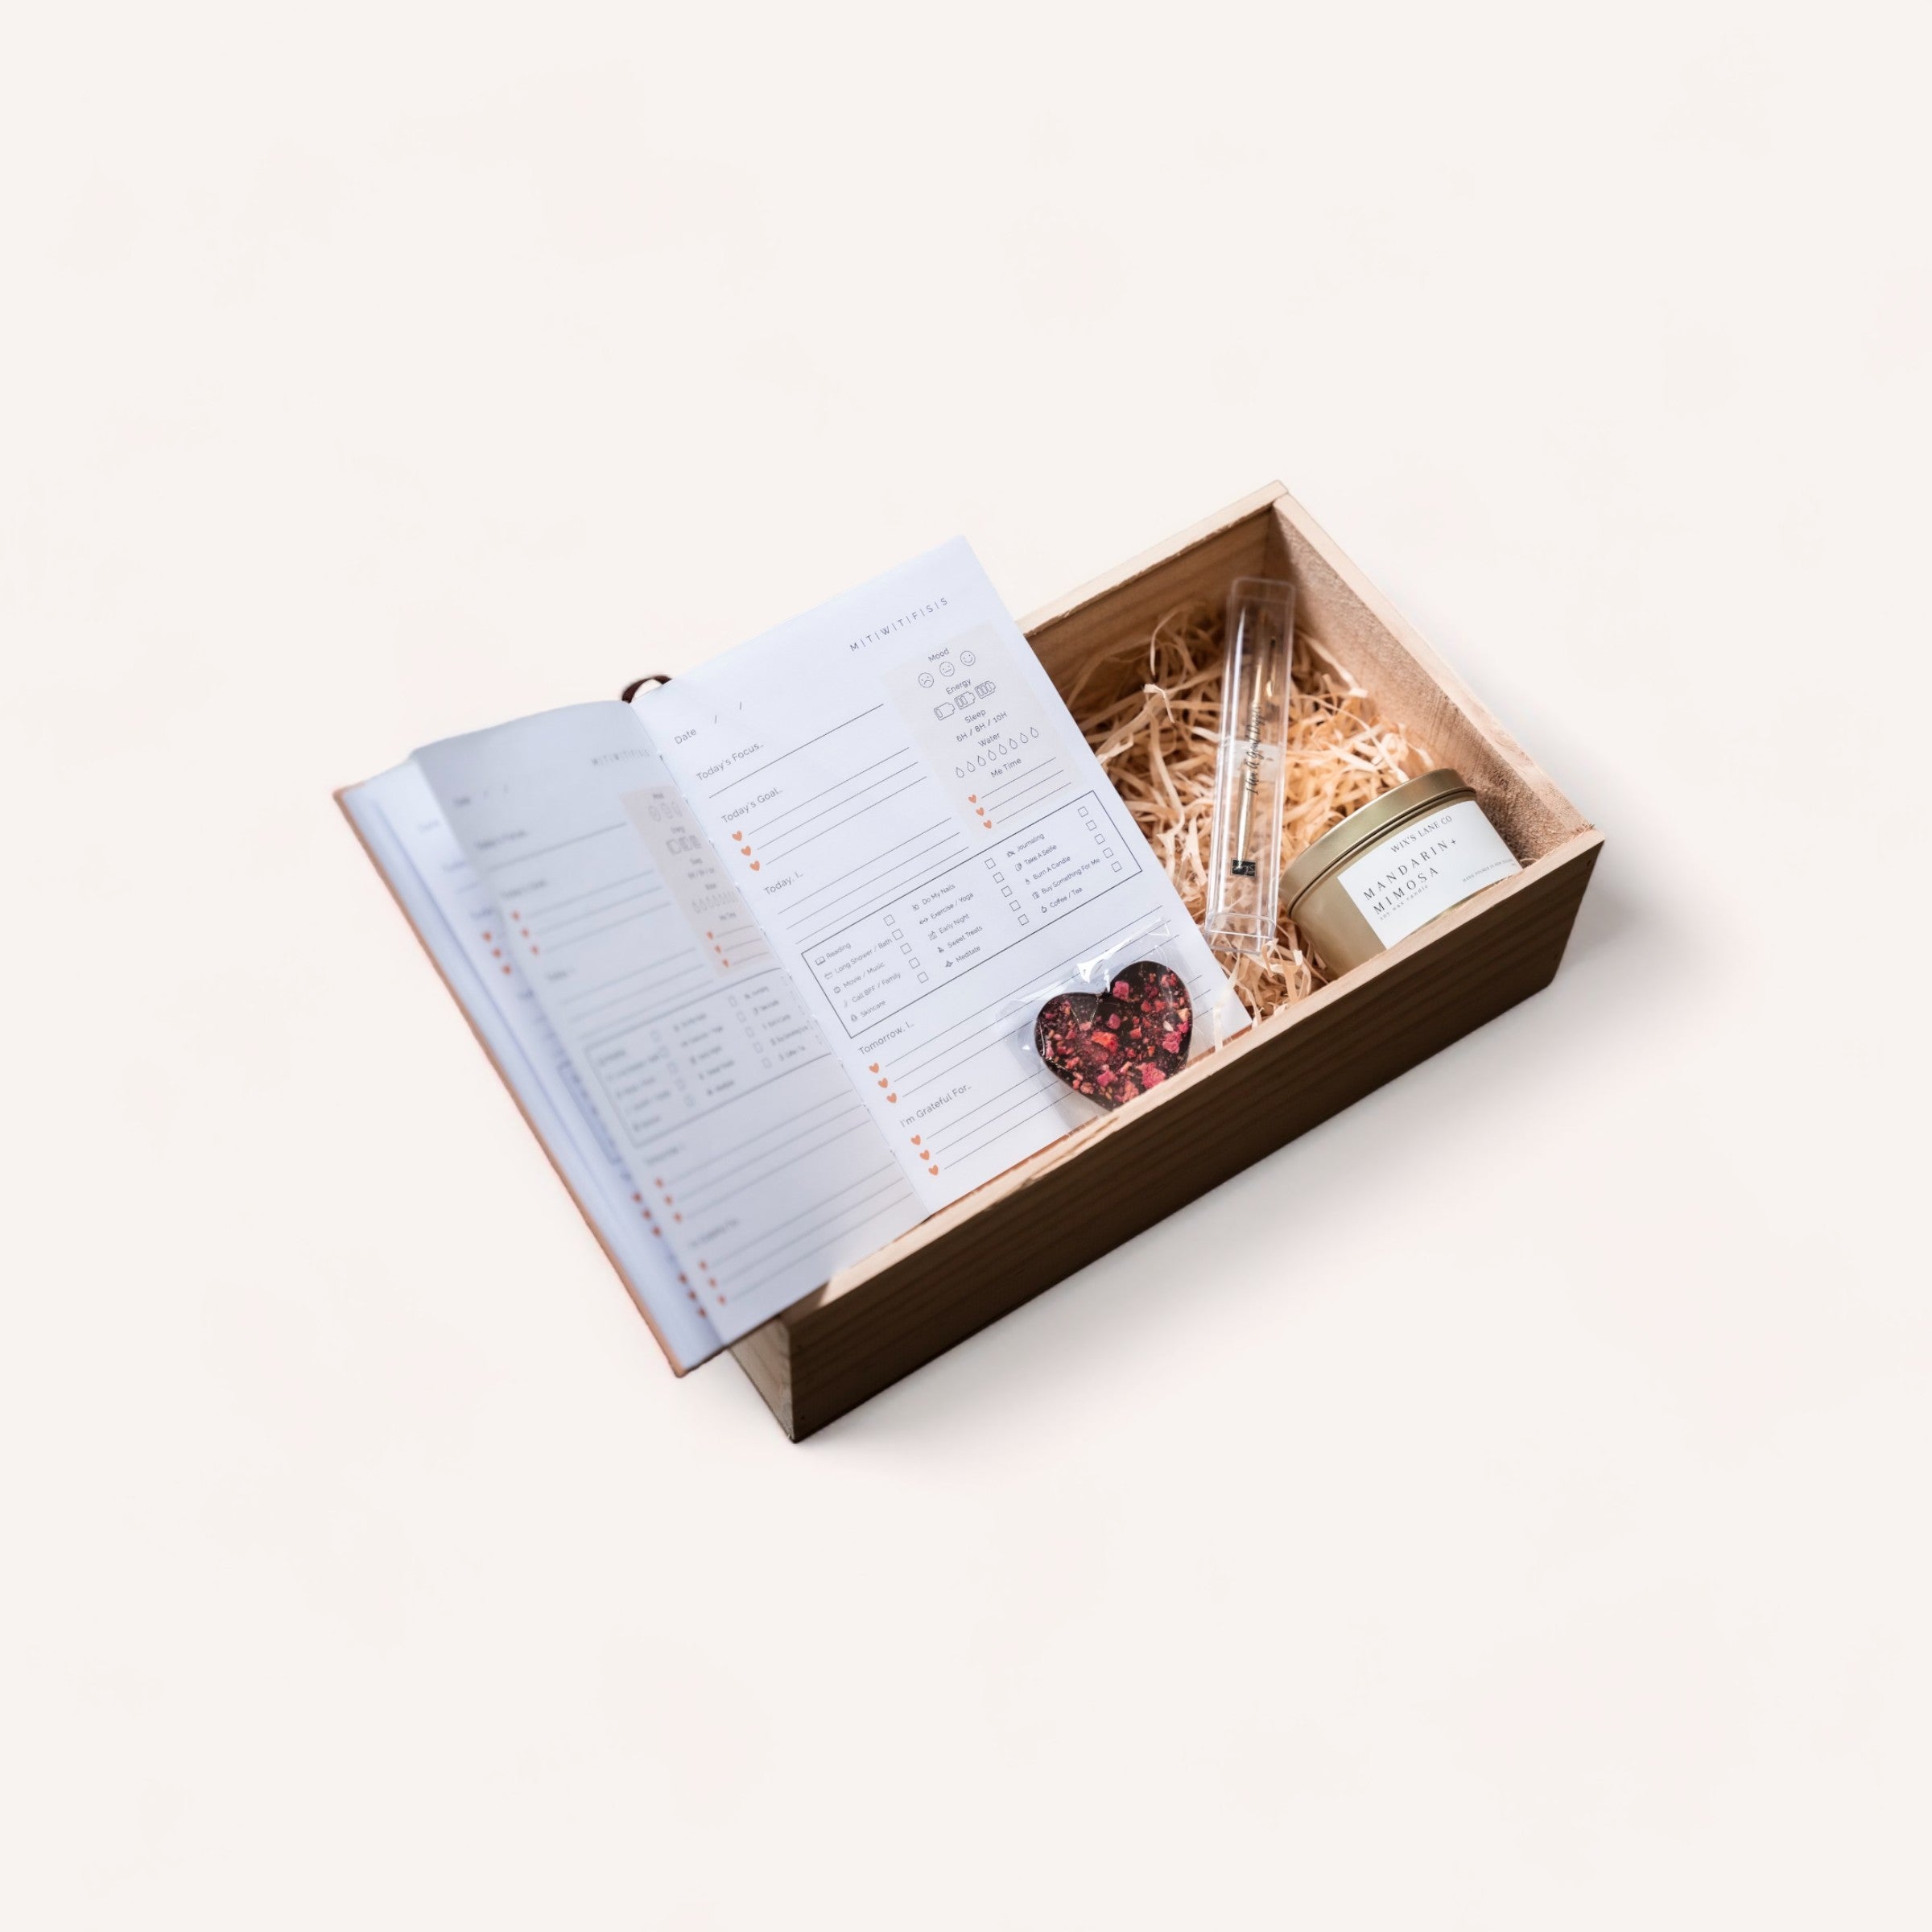 A minimalist presentation of an open Mindful Moments self-care gift box with a reflection journal on top and a tranquil candle tucked inside amidst protective straw padding, all against a clean, white background.